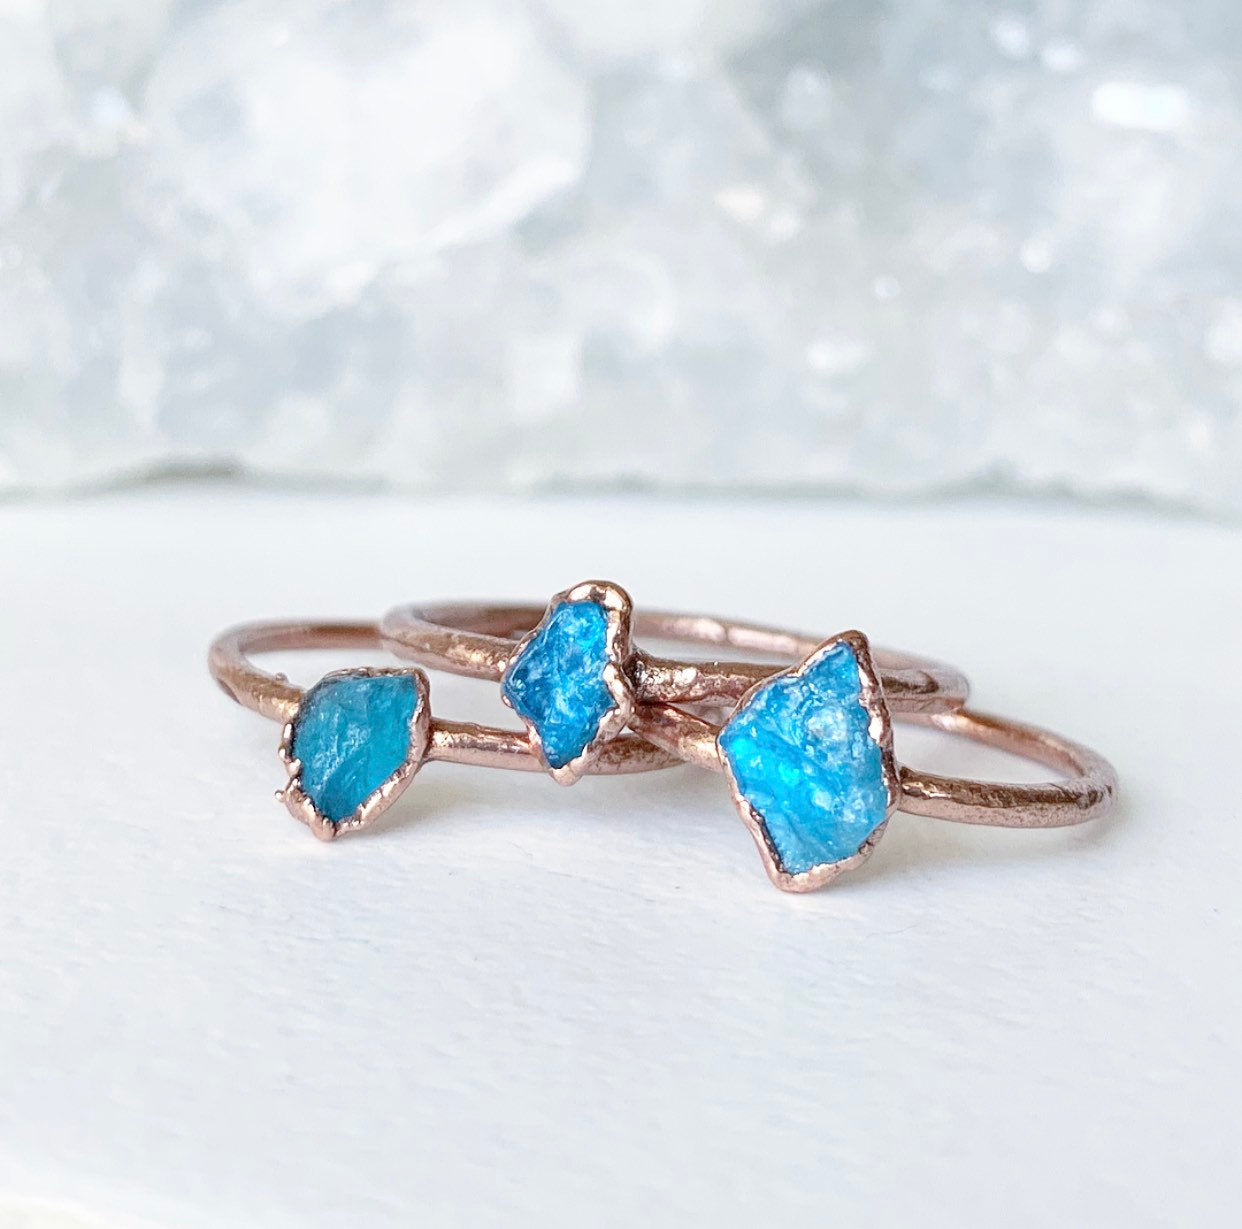 Dainty Apatite Crystal Ring, Delicate Crystal Jewelry, Tiny Stone Ring, Small Copper Stacking Ring, Raw Apatite Ring, Raw Blue Crystal Ring